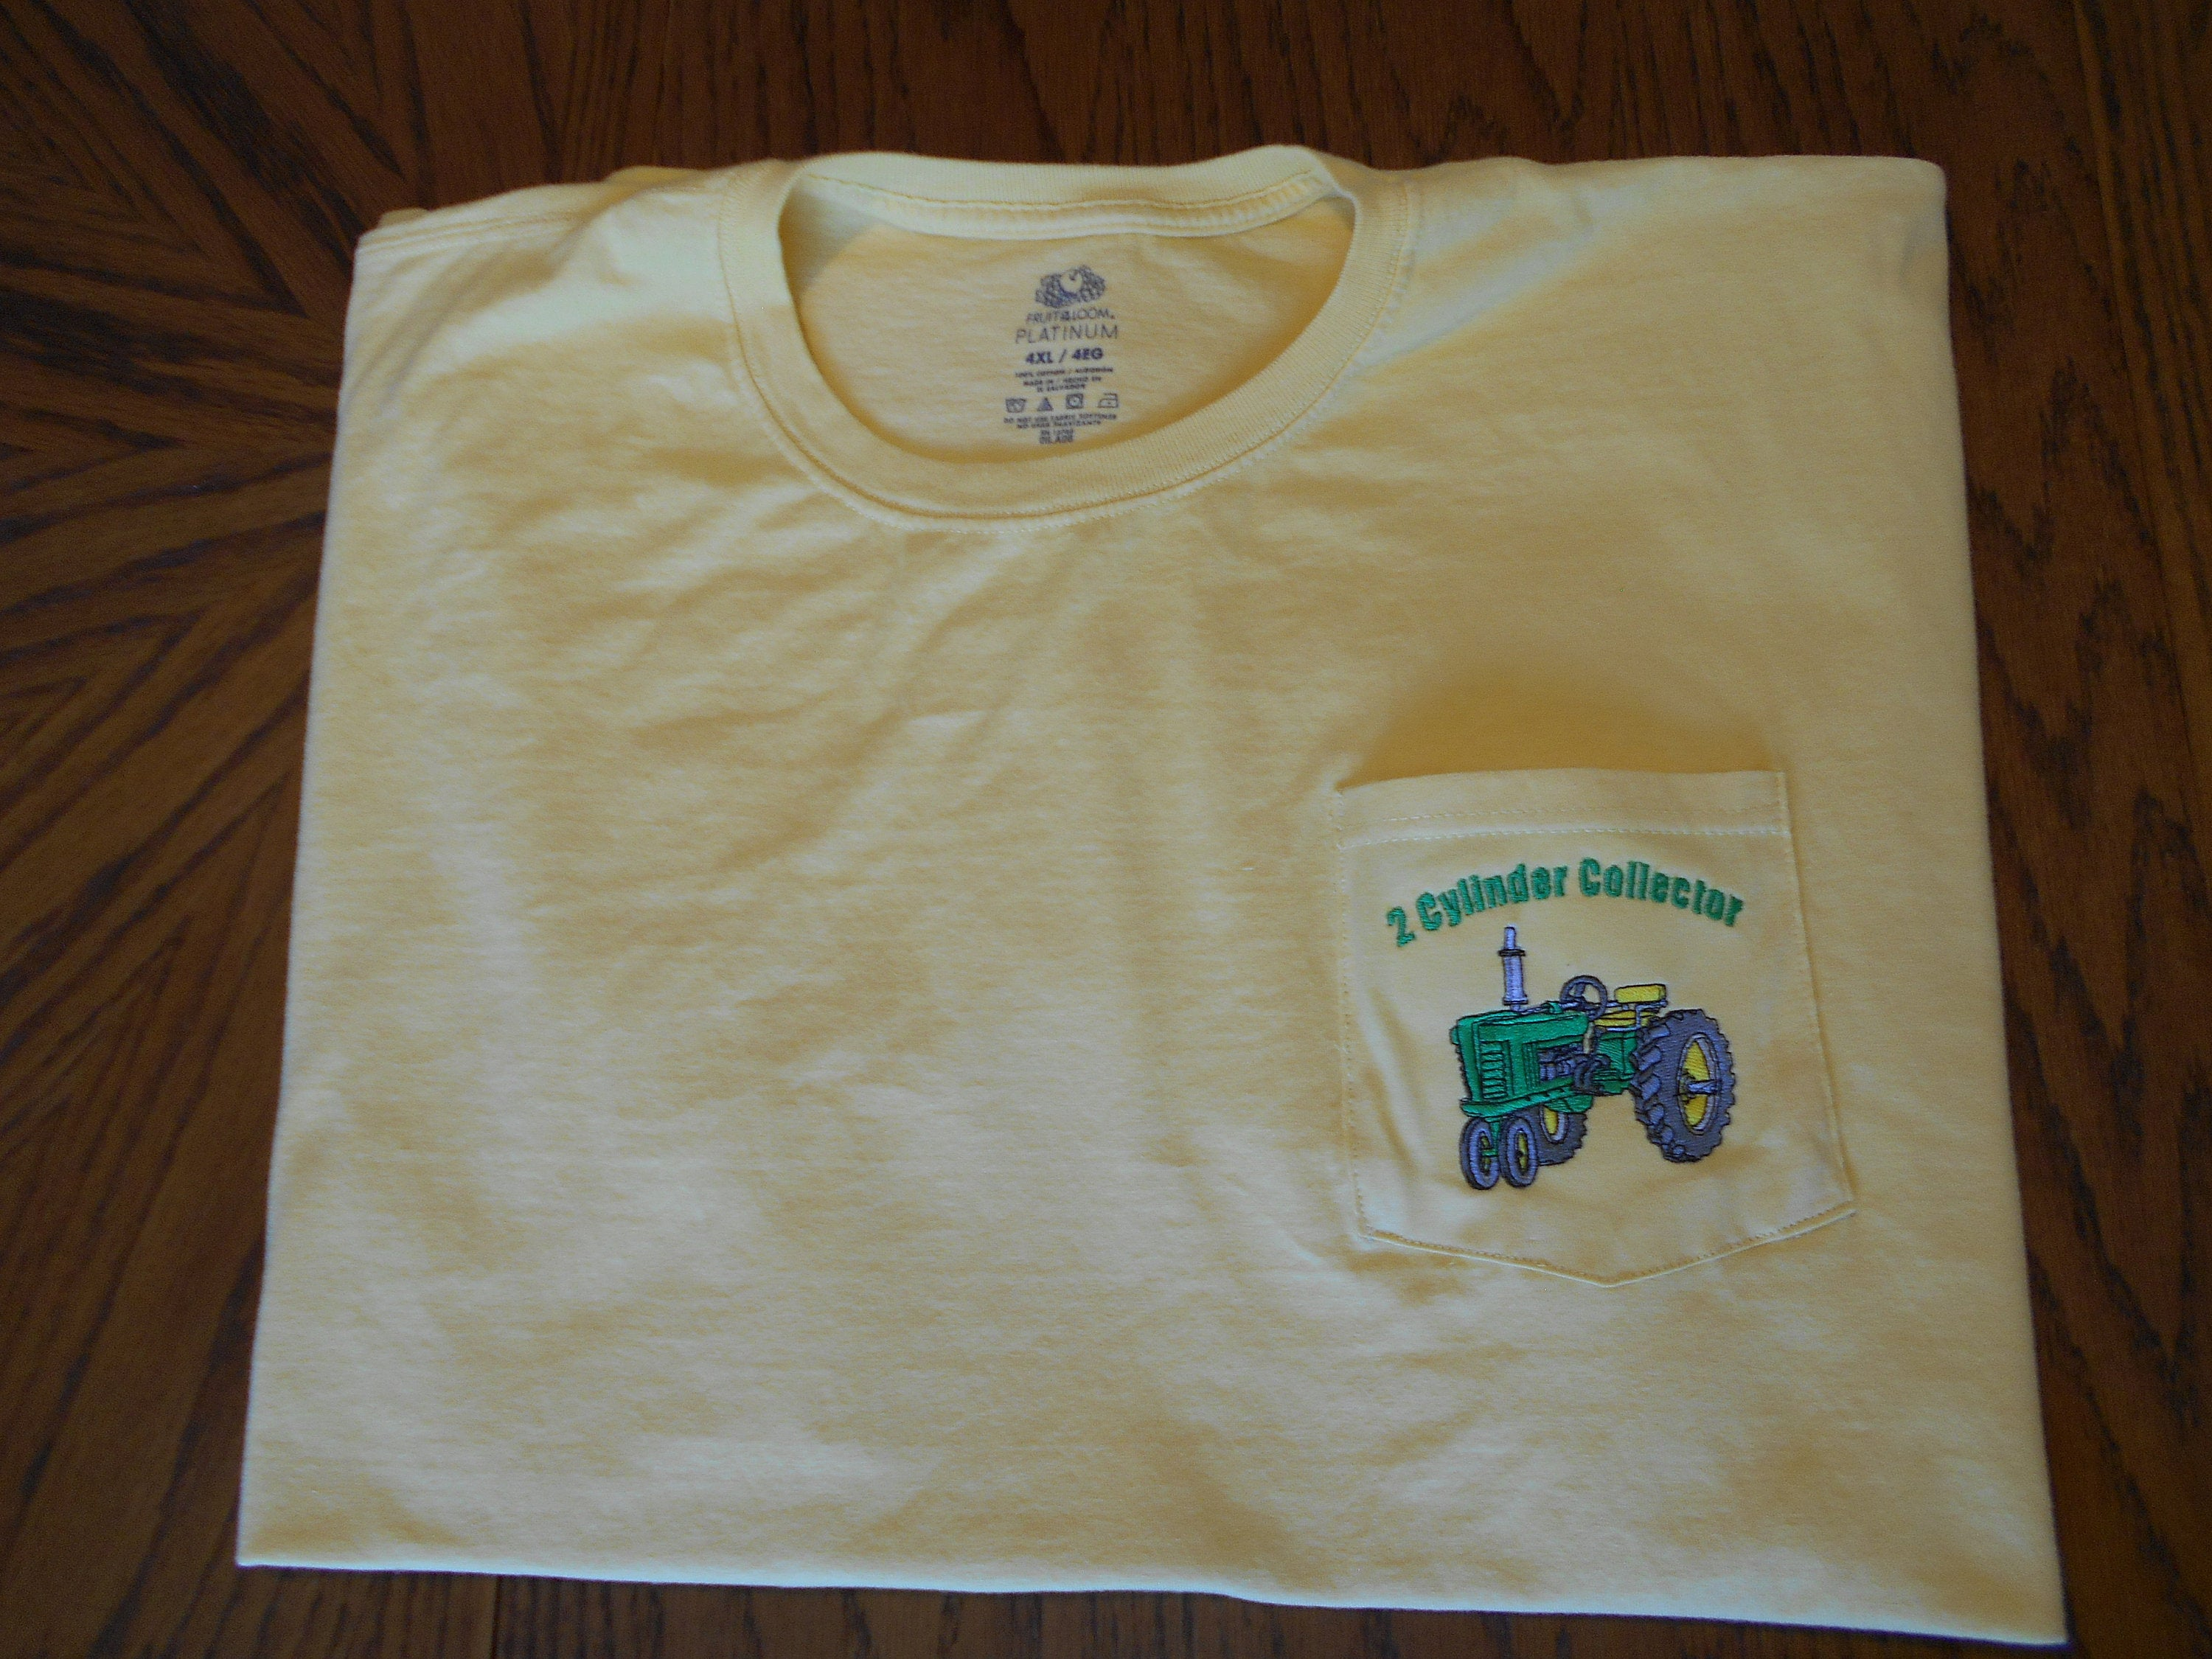 John Deere Embroidery Patterns New Listing Mens Ss T Shirt Machine Embroidery John Deere Design Size 4xl